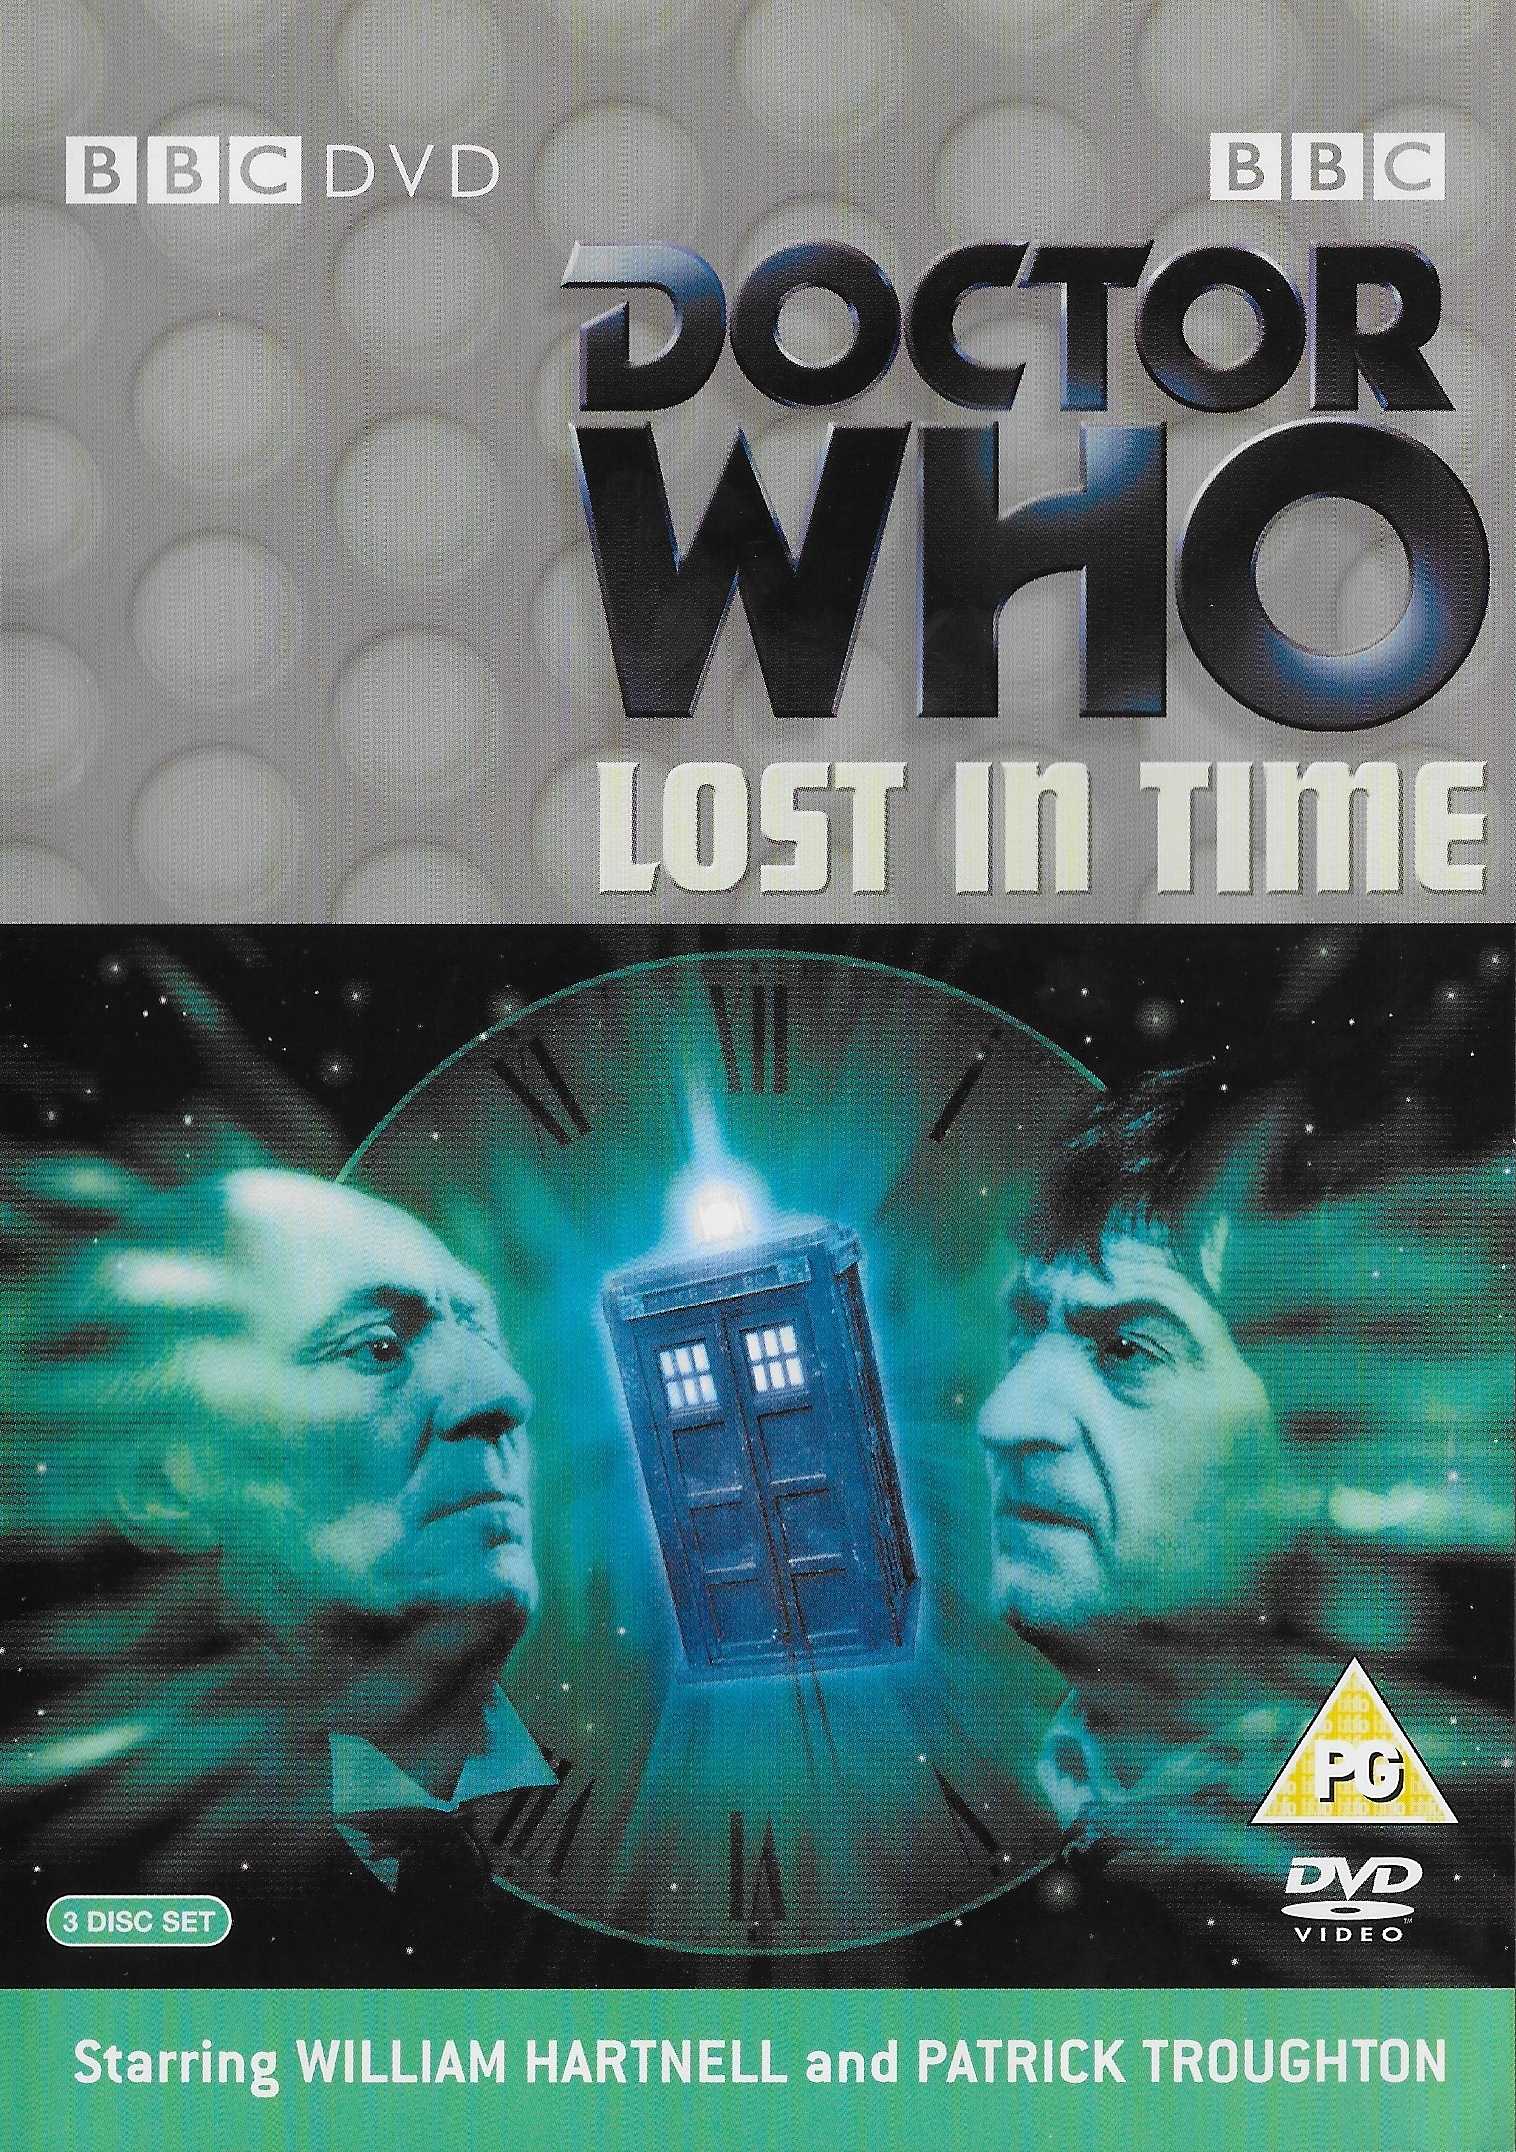 Picture of BBCDVD 1353 Doctor Who - Lost in time by artist Various from the BBC dvds - Records and Tapes library